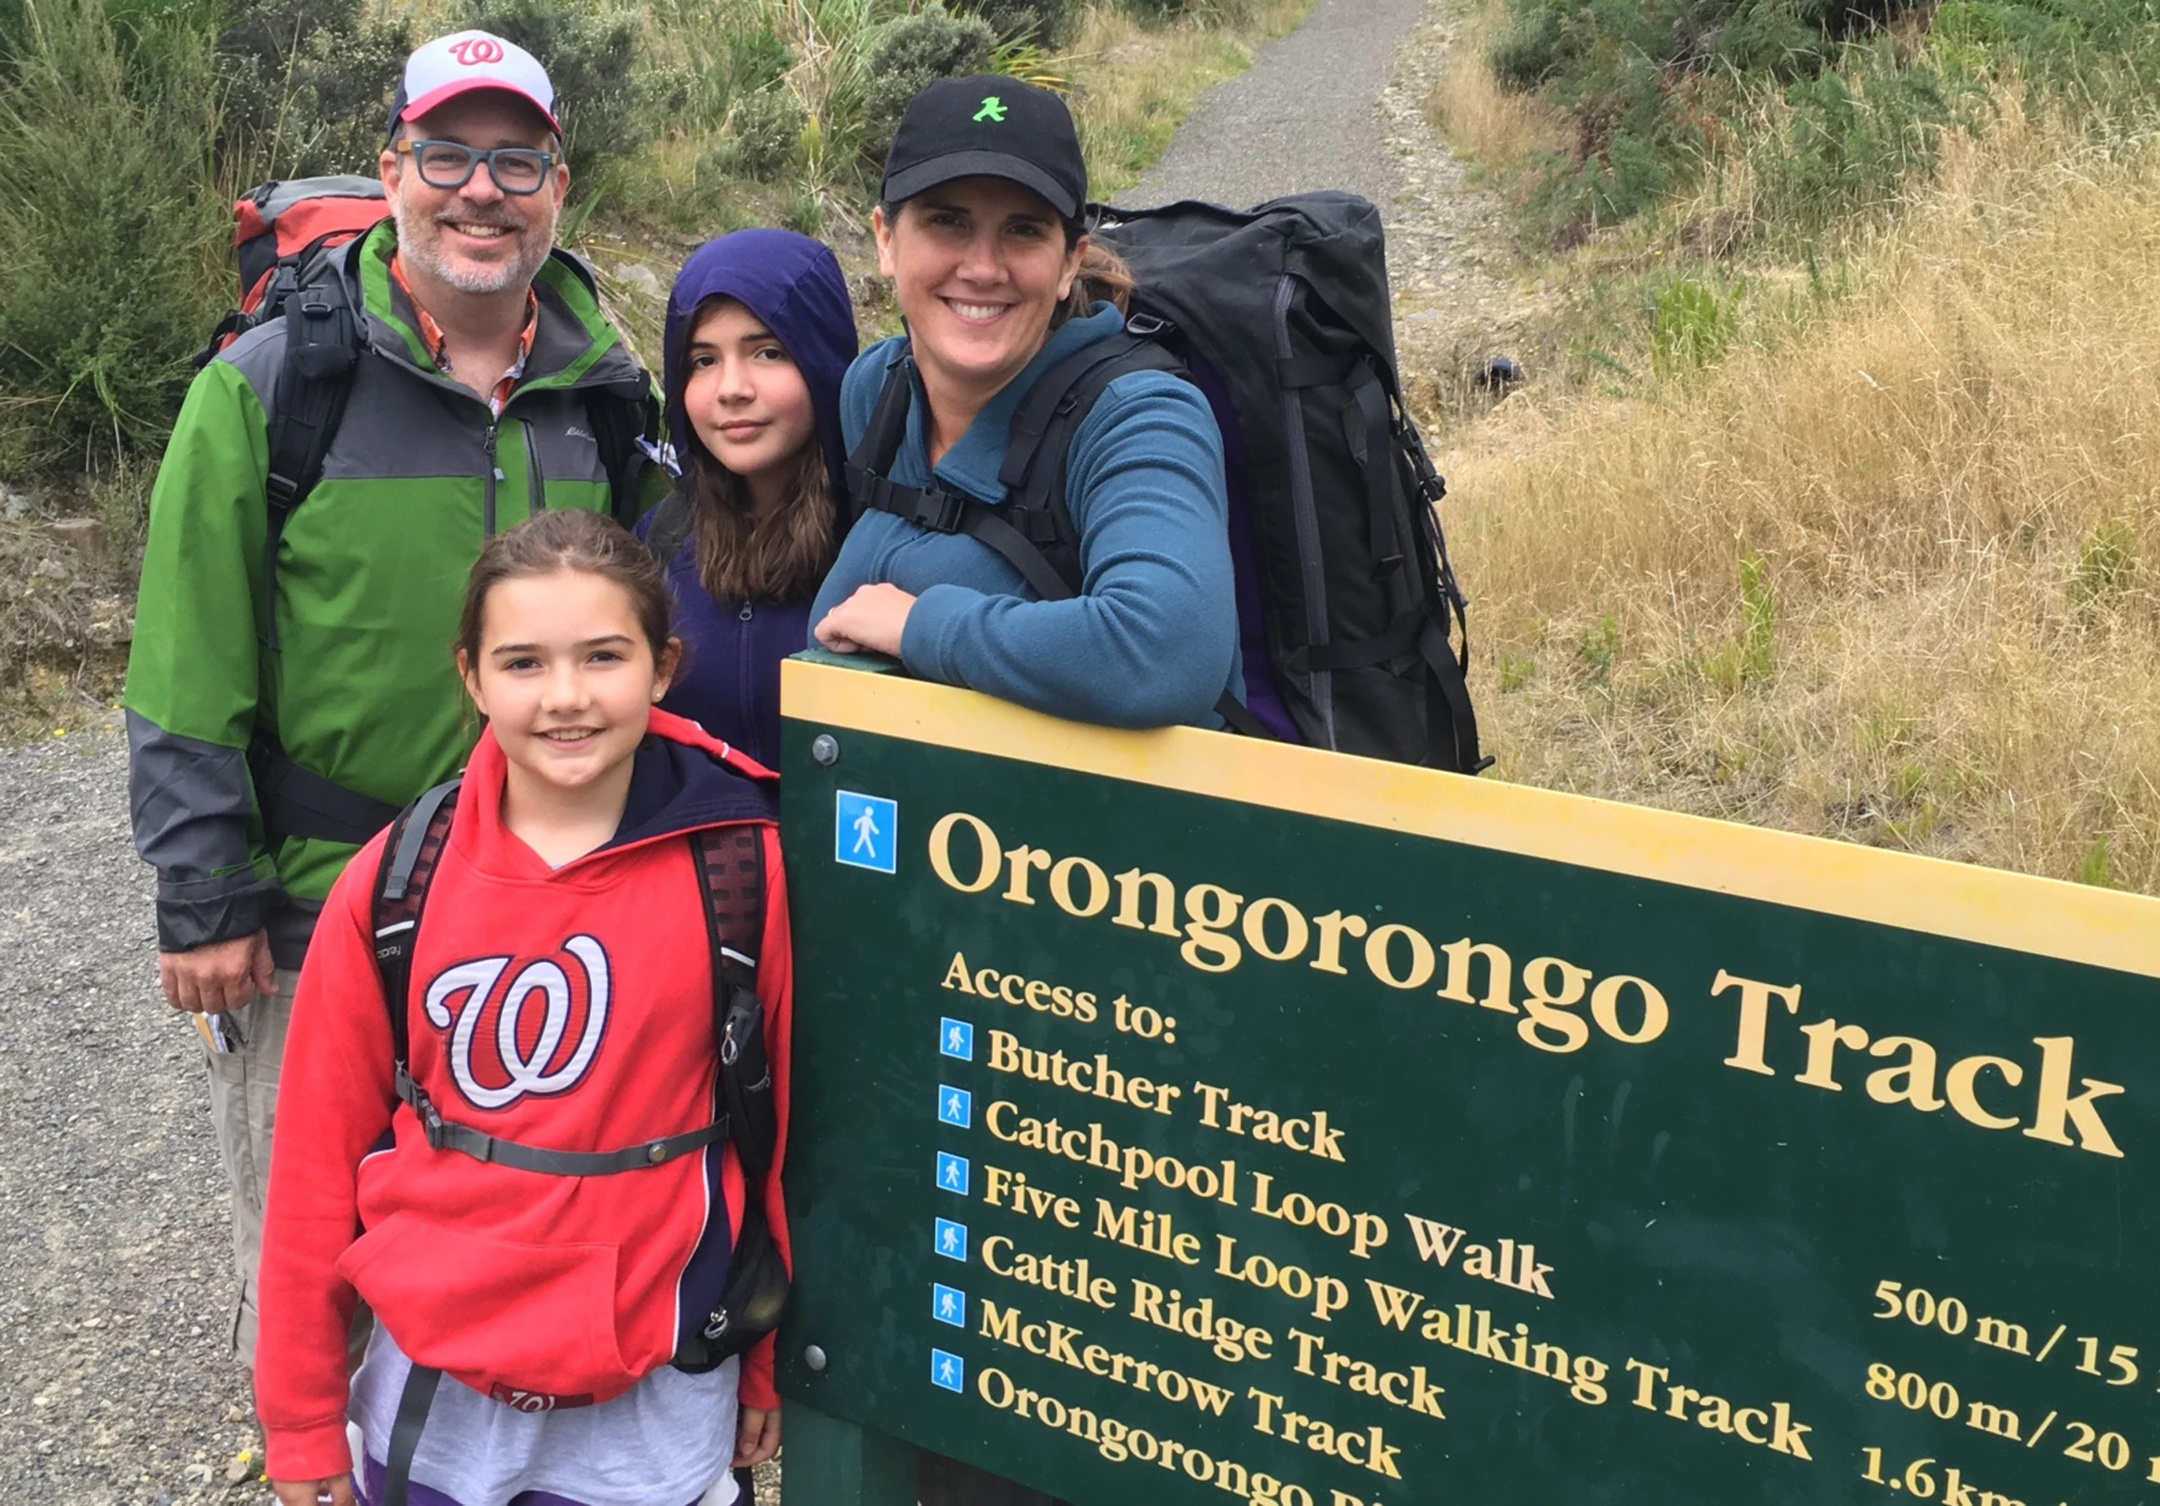 Dan Kois and his wife with their two daughters pose and smile next to a sign that reads Orongorongo Track